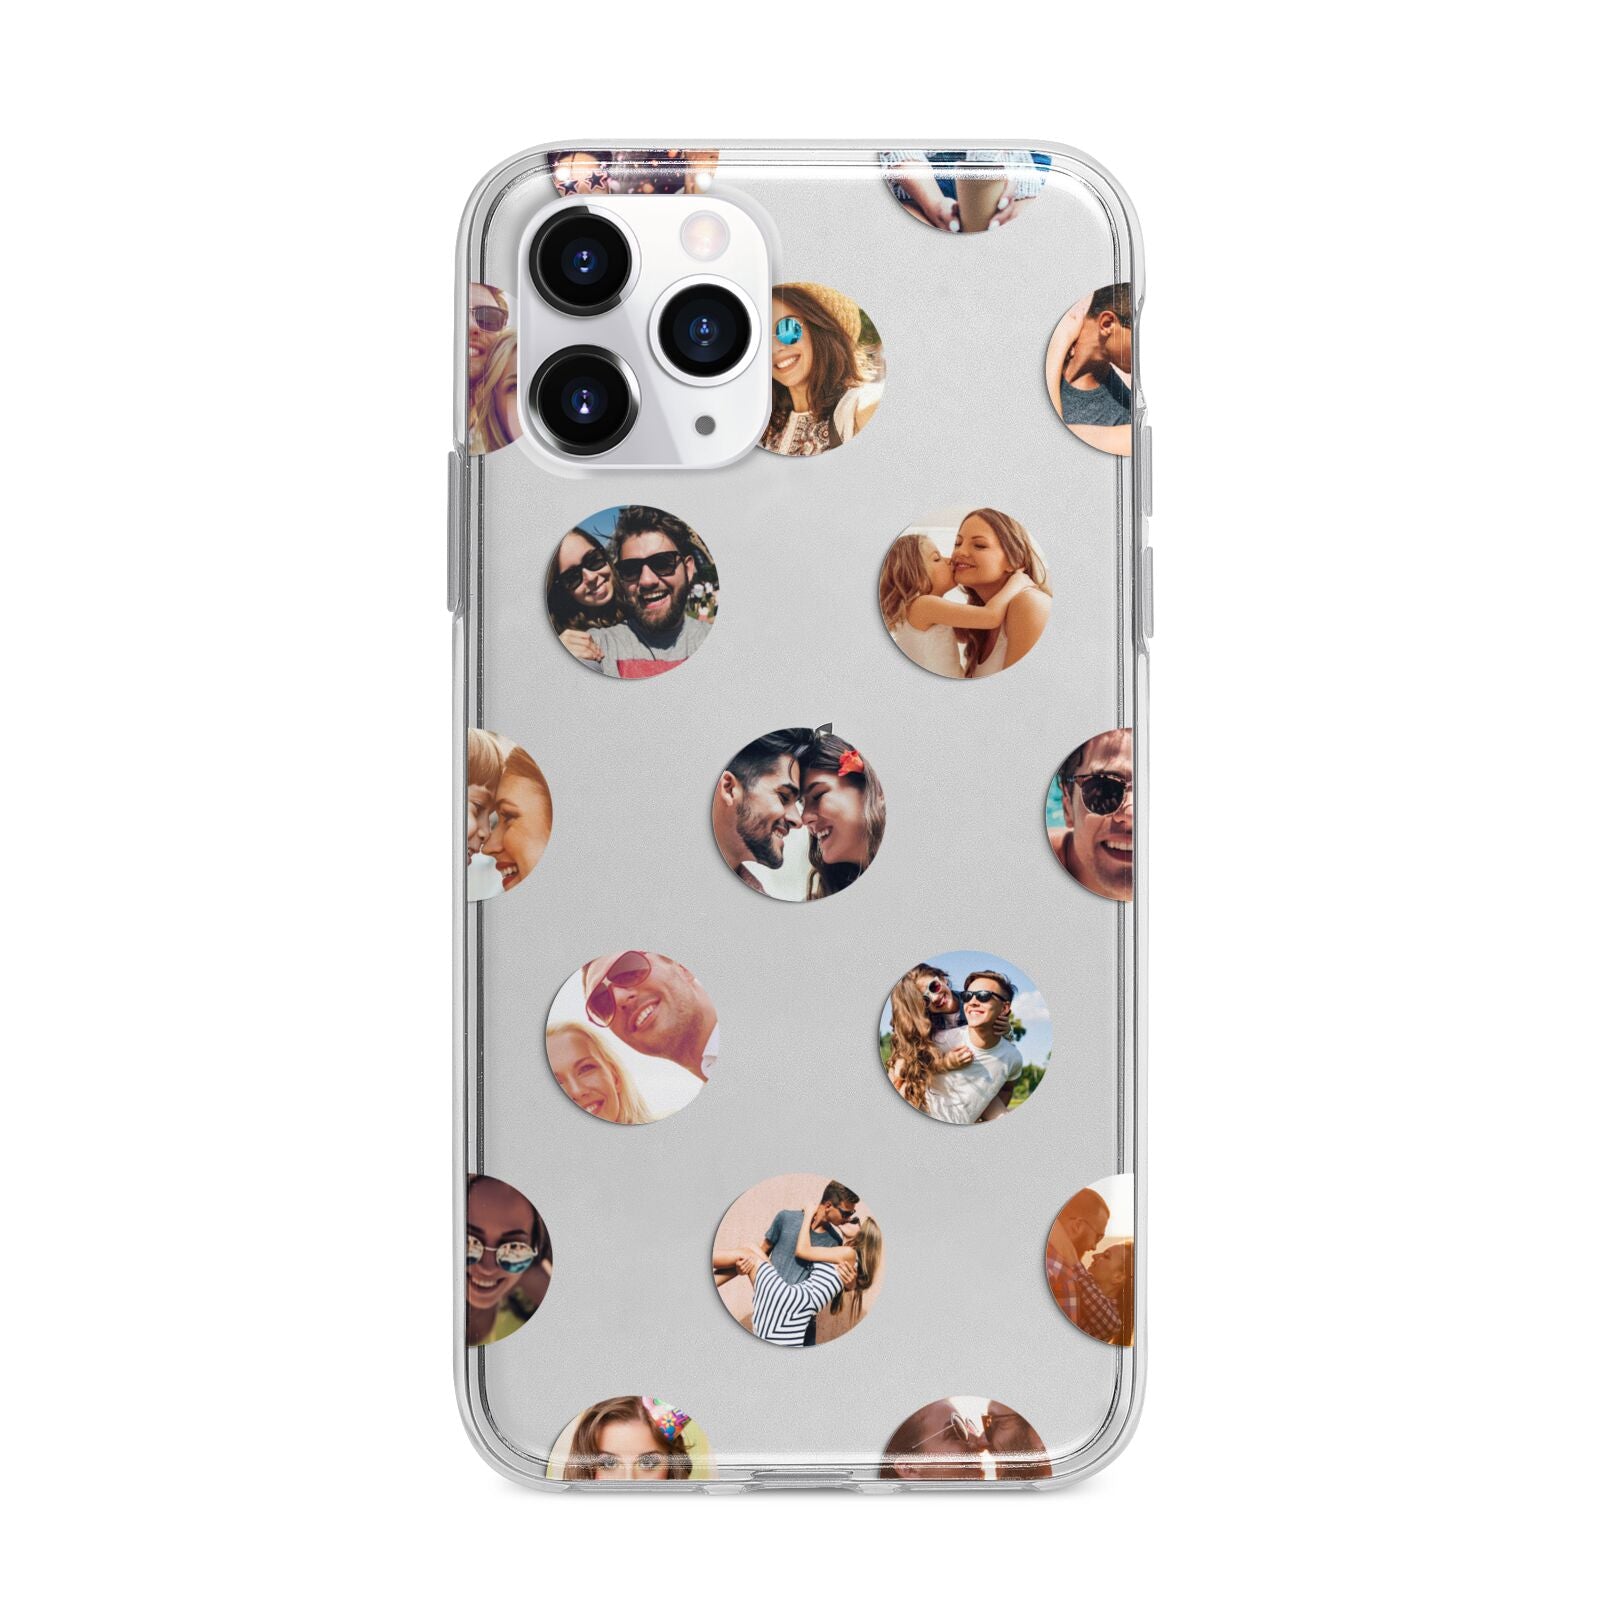 Polka Dot Photo Montage Upload Apple iPhone 11 Pro in Silver with Bumper Case